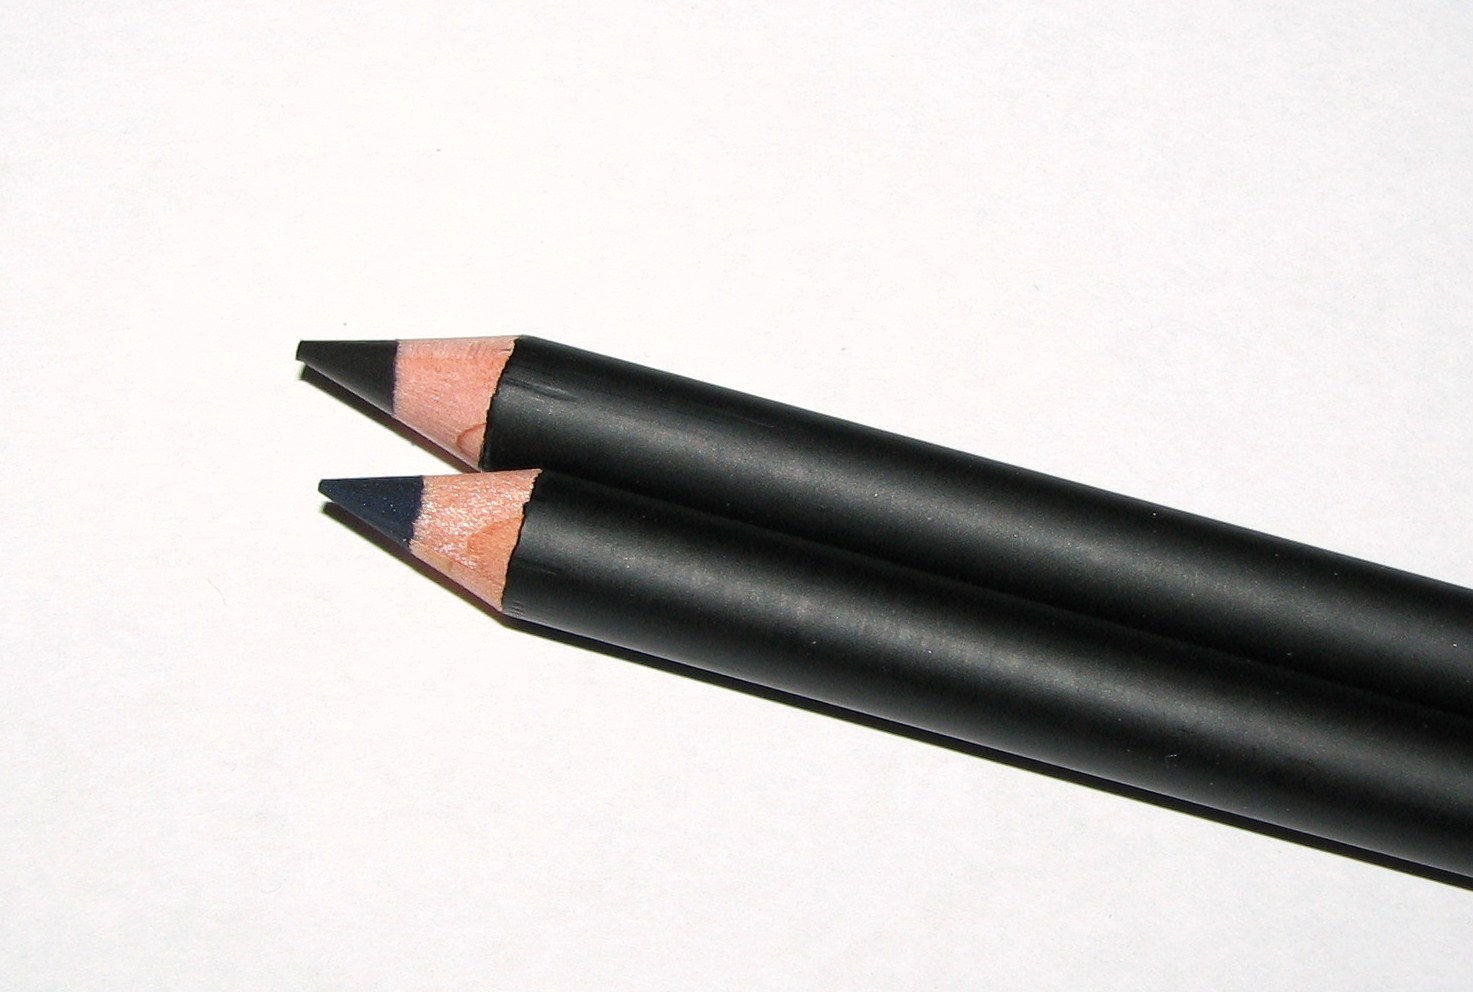 Chanel NOIR and MARINE Le Crayon Kohl Intense Eye Pencil Swatches and  Review - Blushing Noir